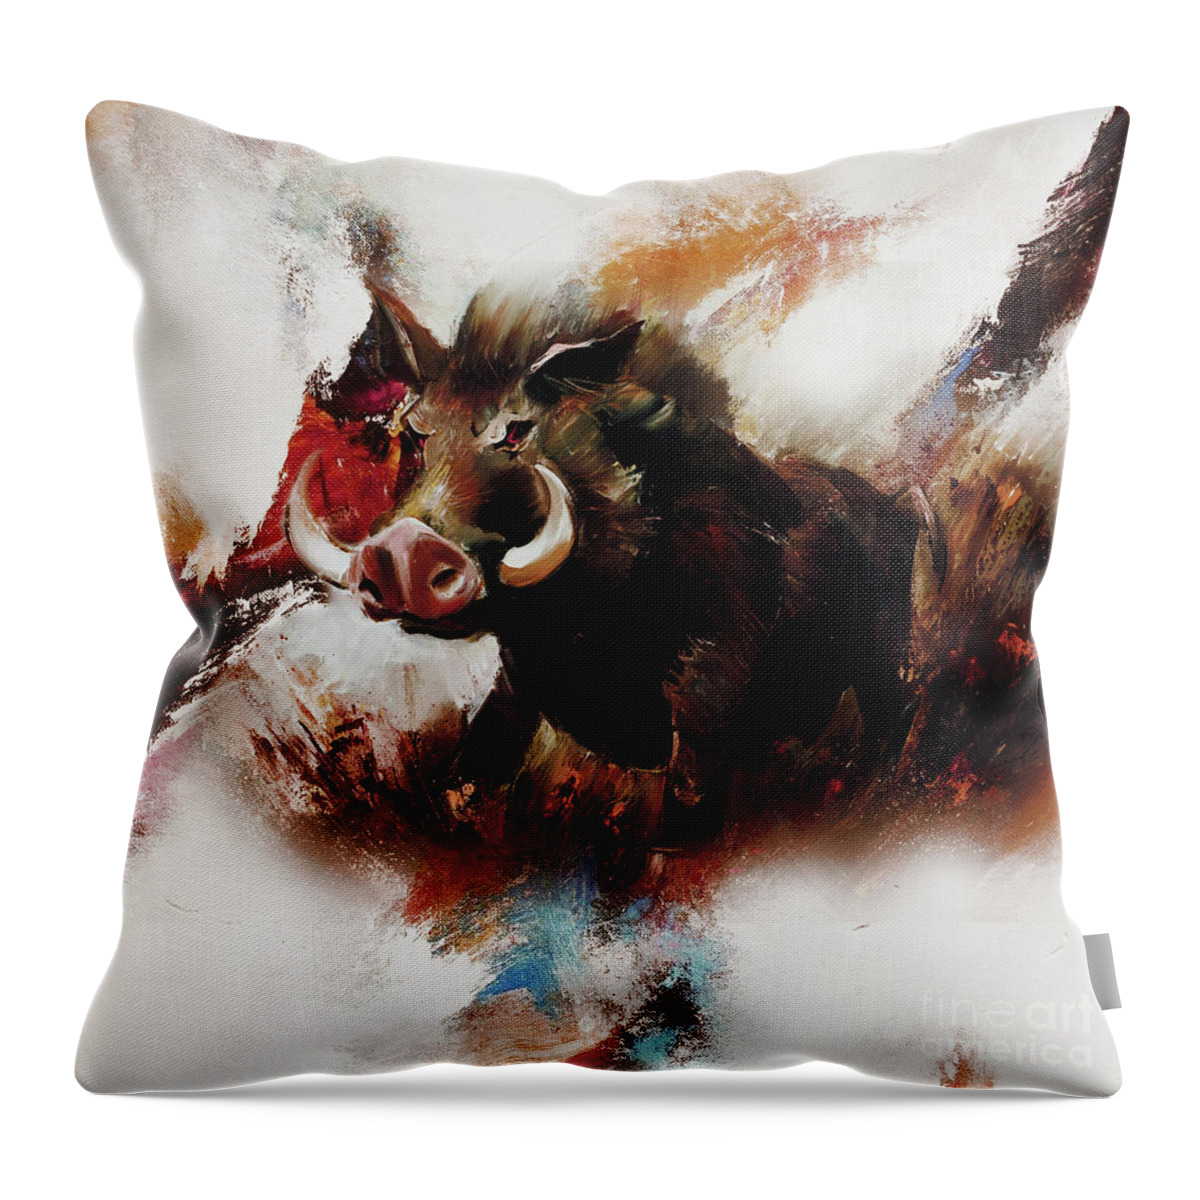  Throw Pillow featuring the painting Boar by Gull G